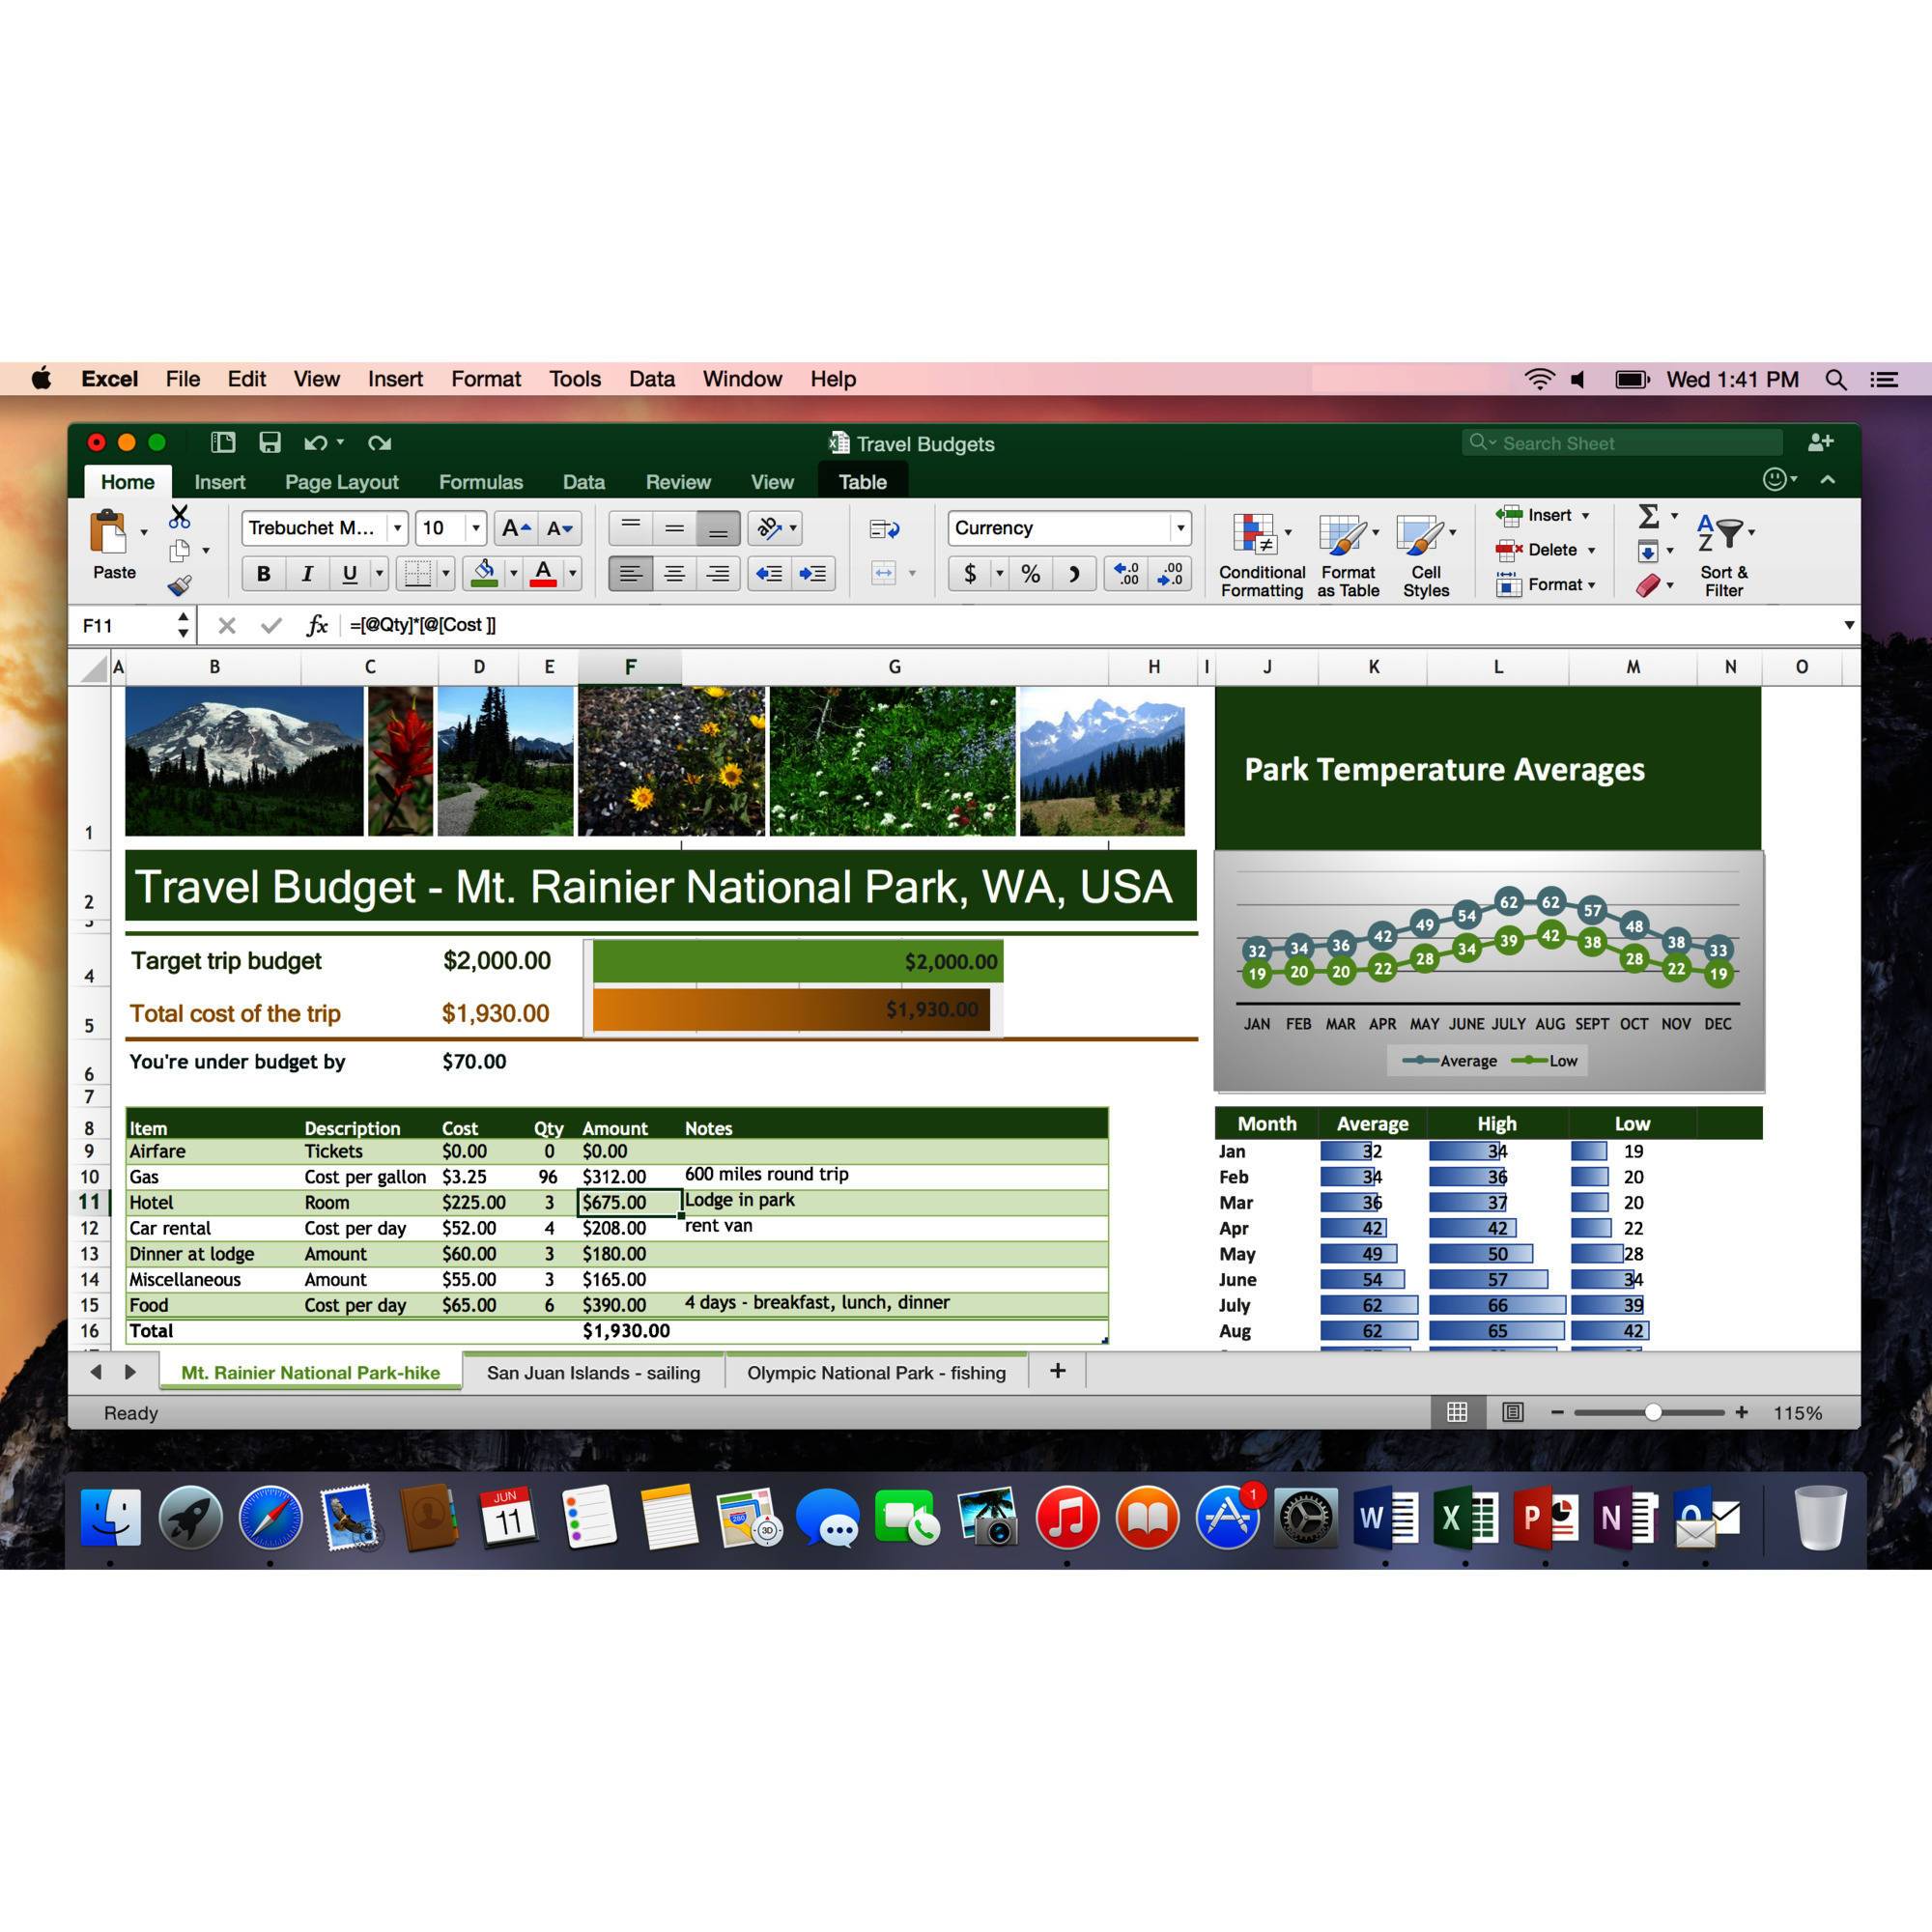 download microsoft office for mac student